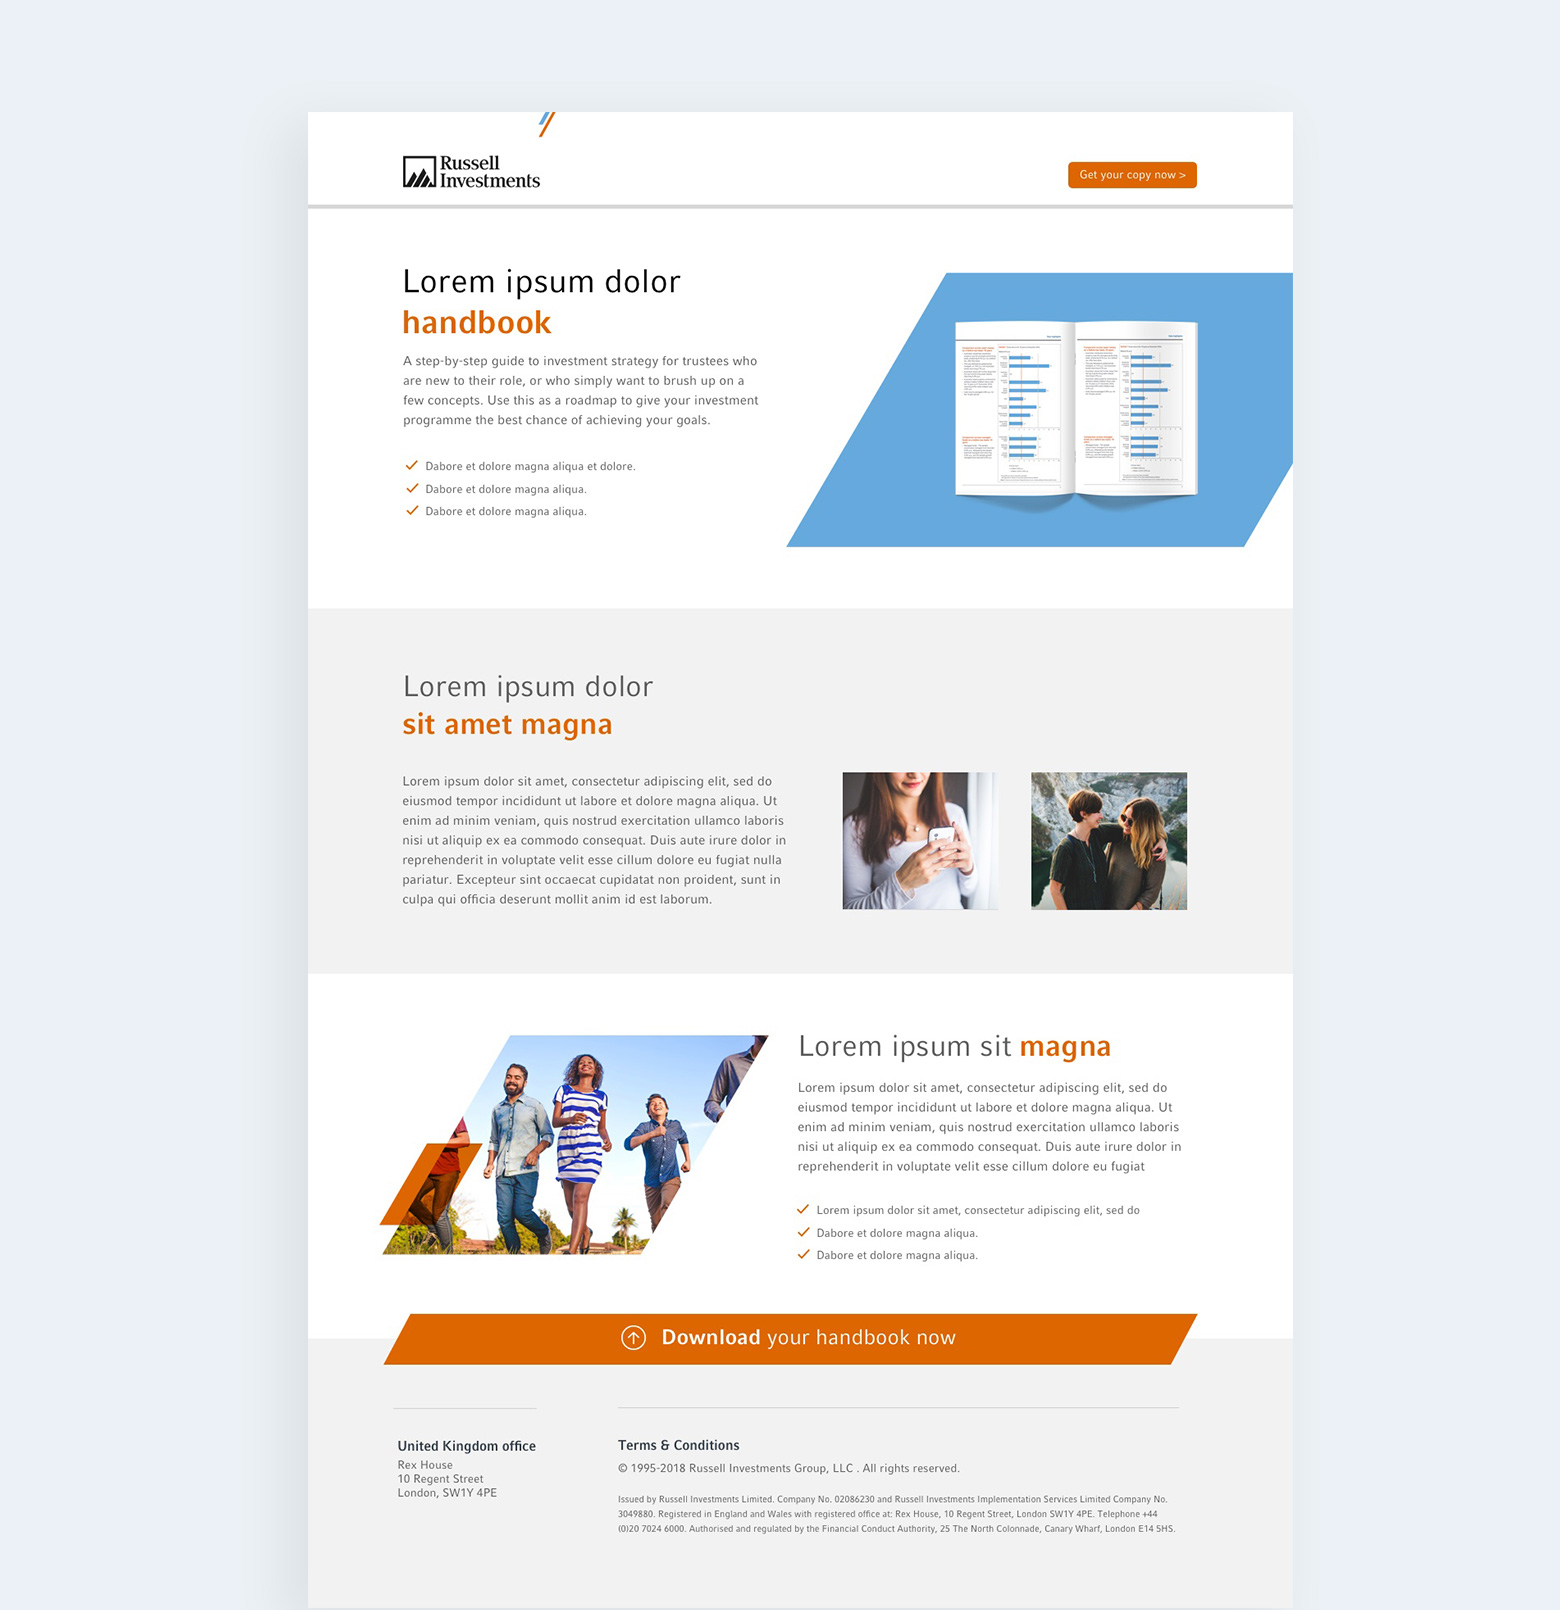 Russel Investments landing page design